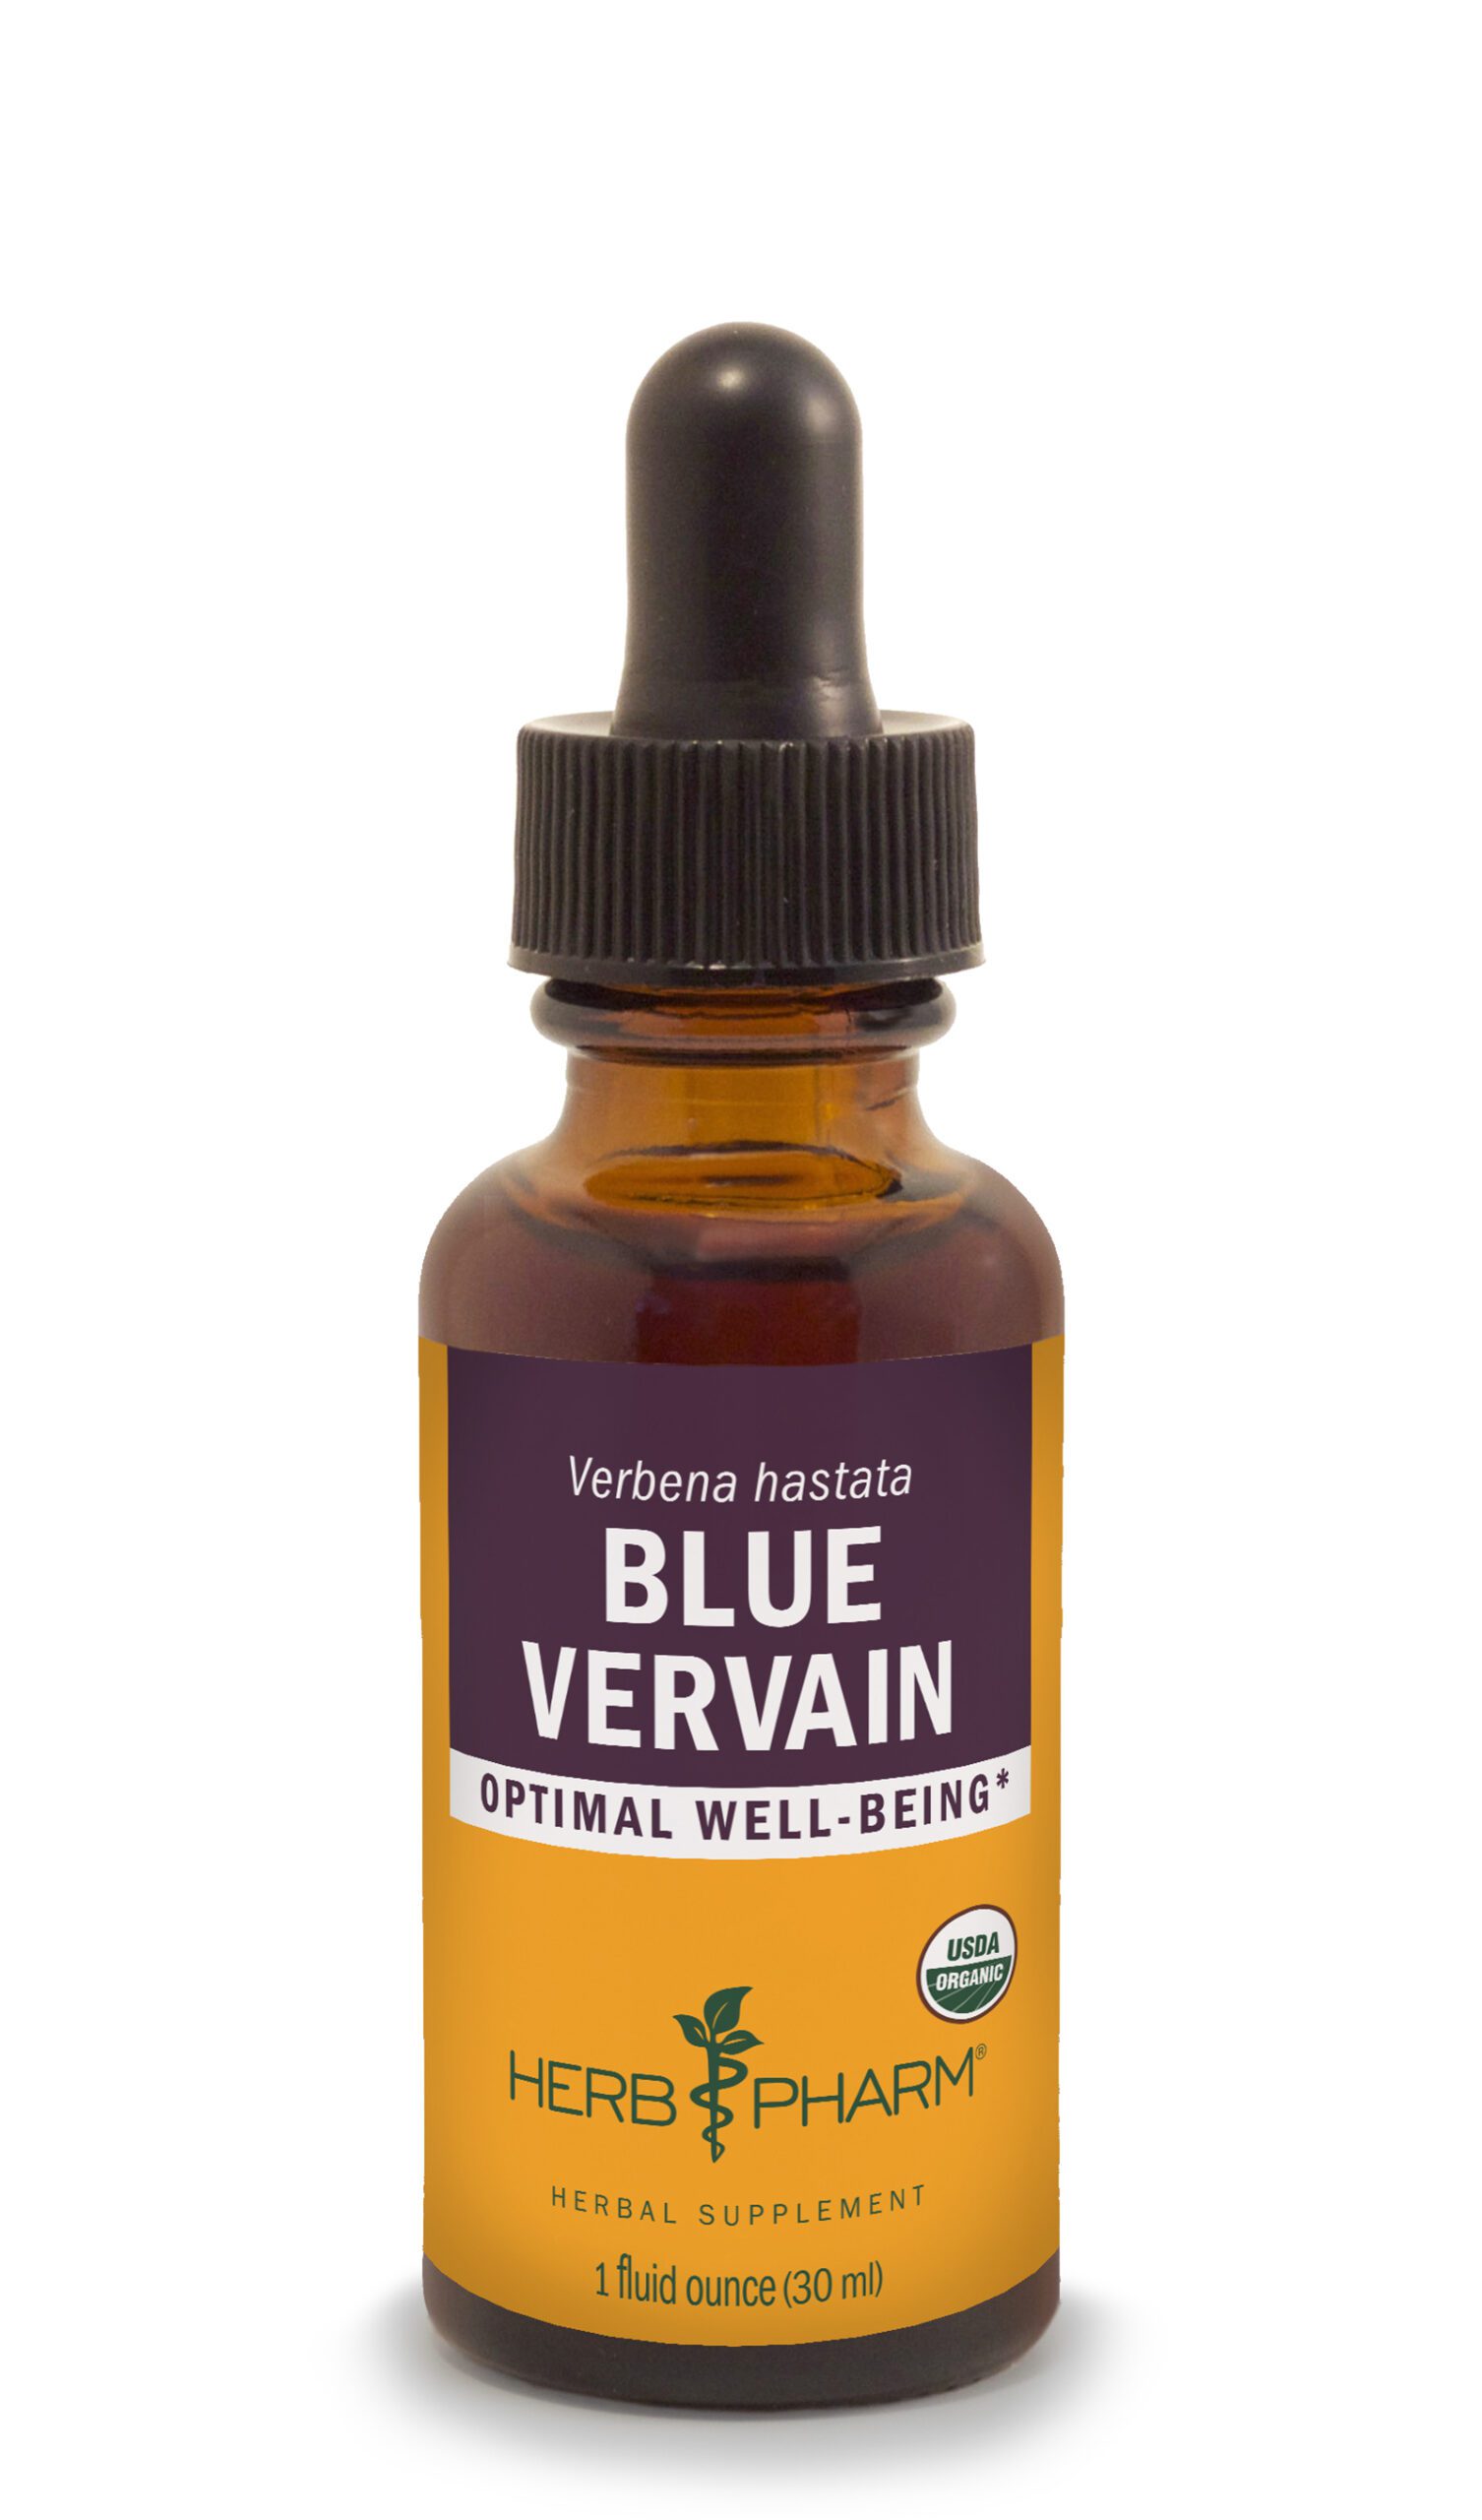 Product Listing Image for Herb Pharm Blue Vervain 1oz Tincture